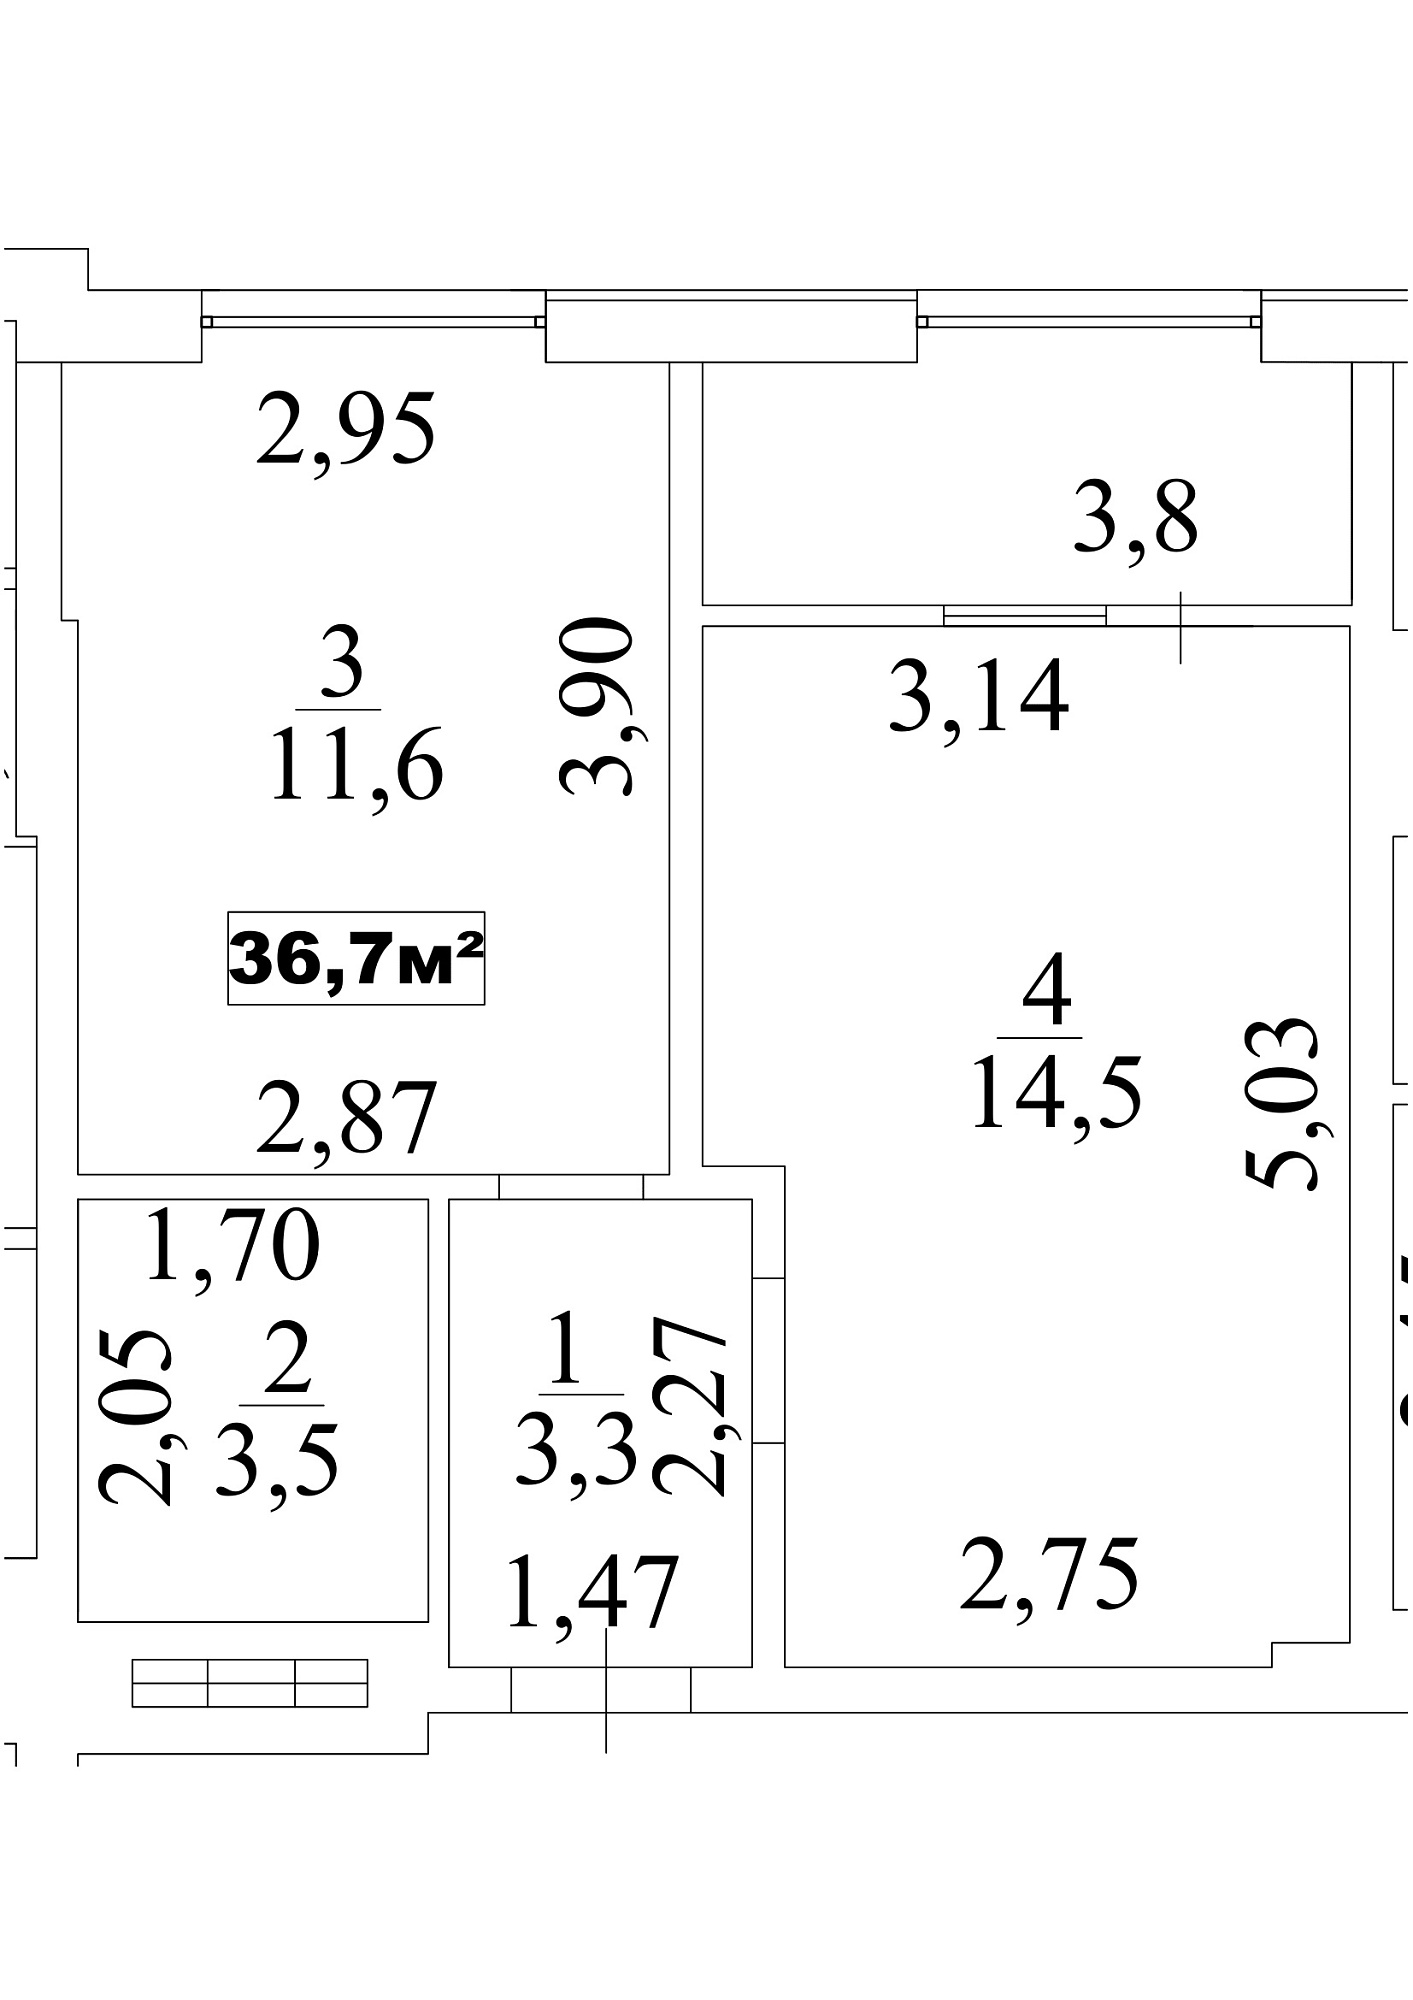 Planning 1-rm flats area 36.7m2, AB-10-01/00006.